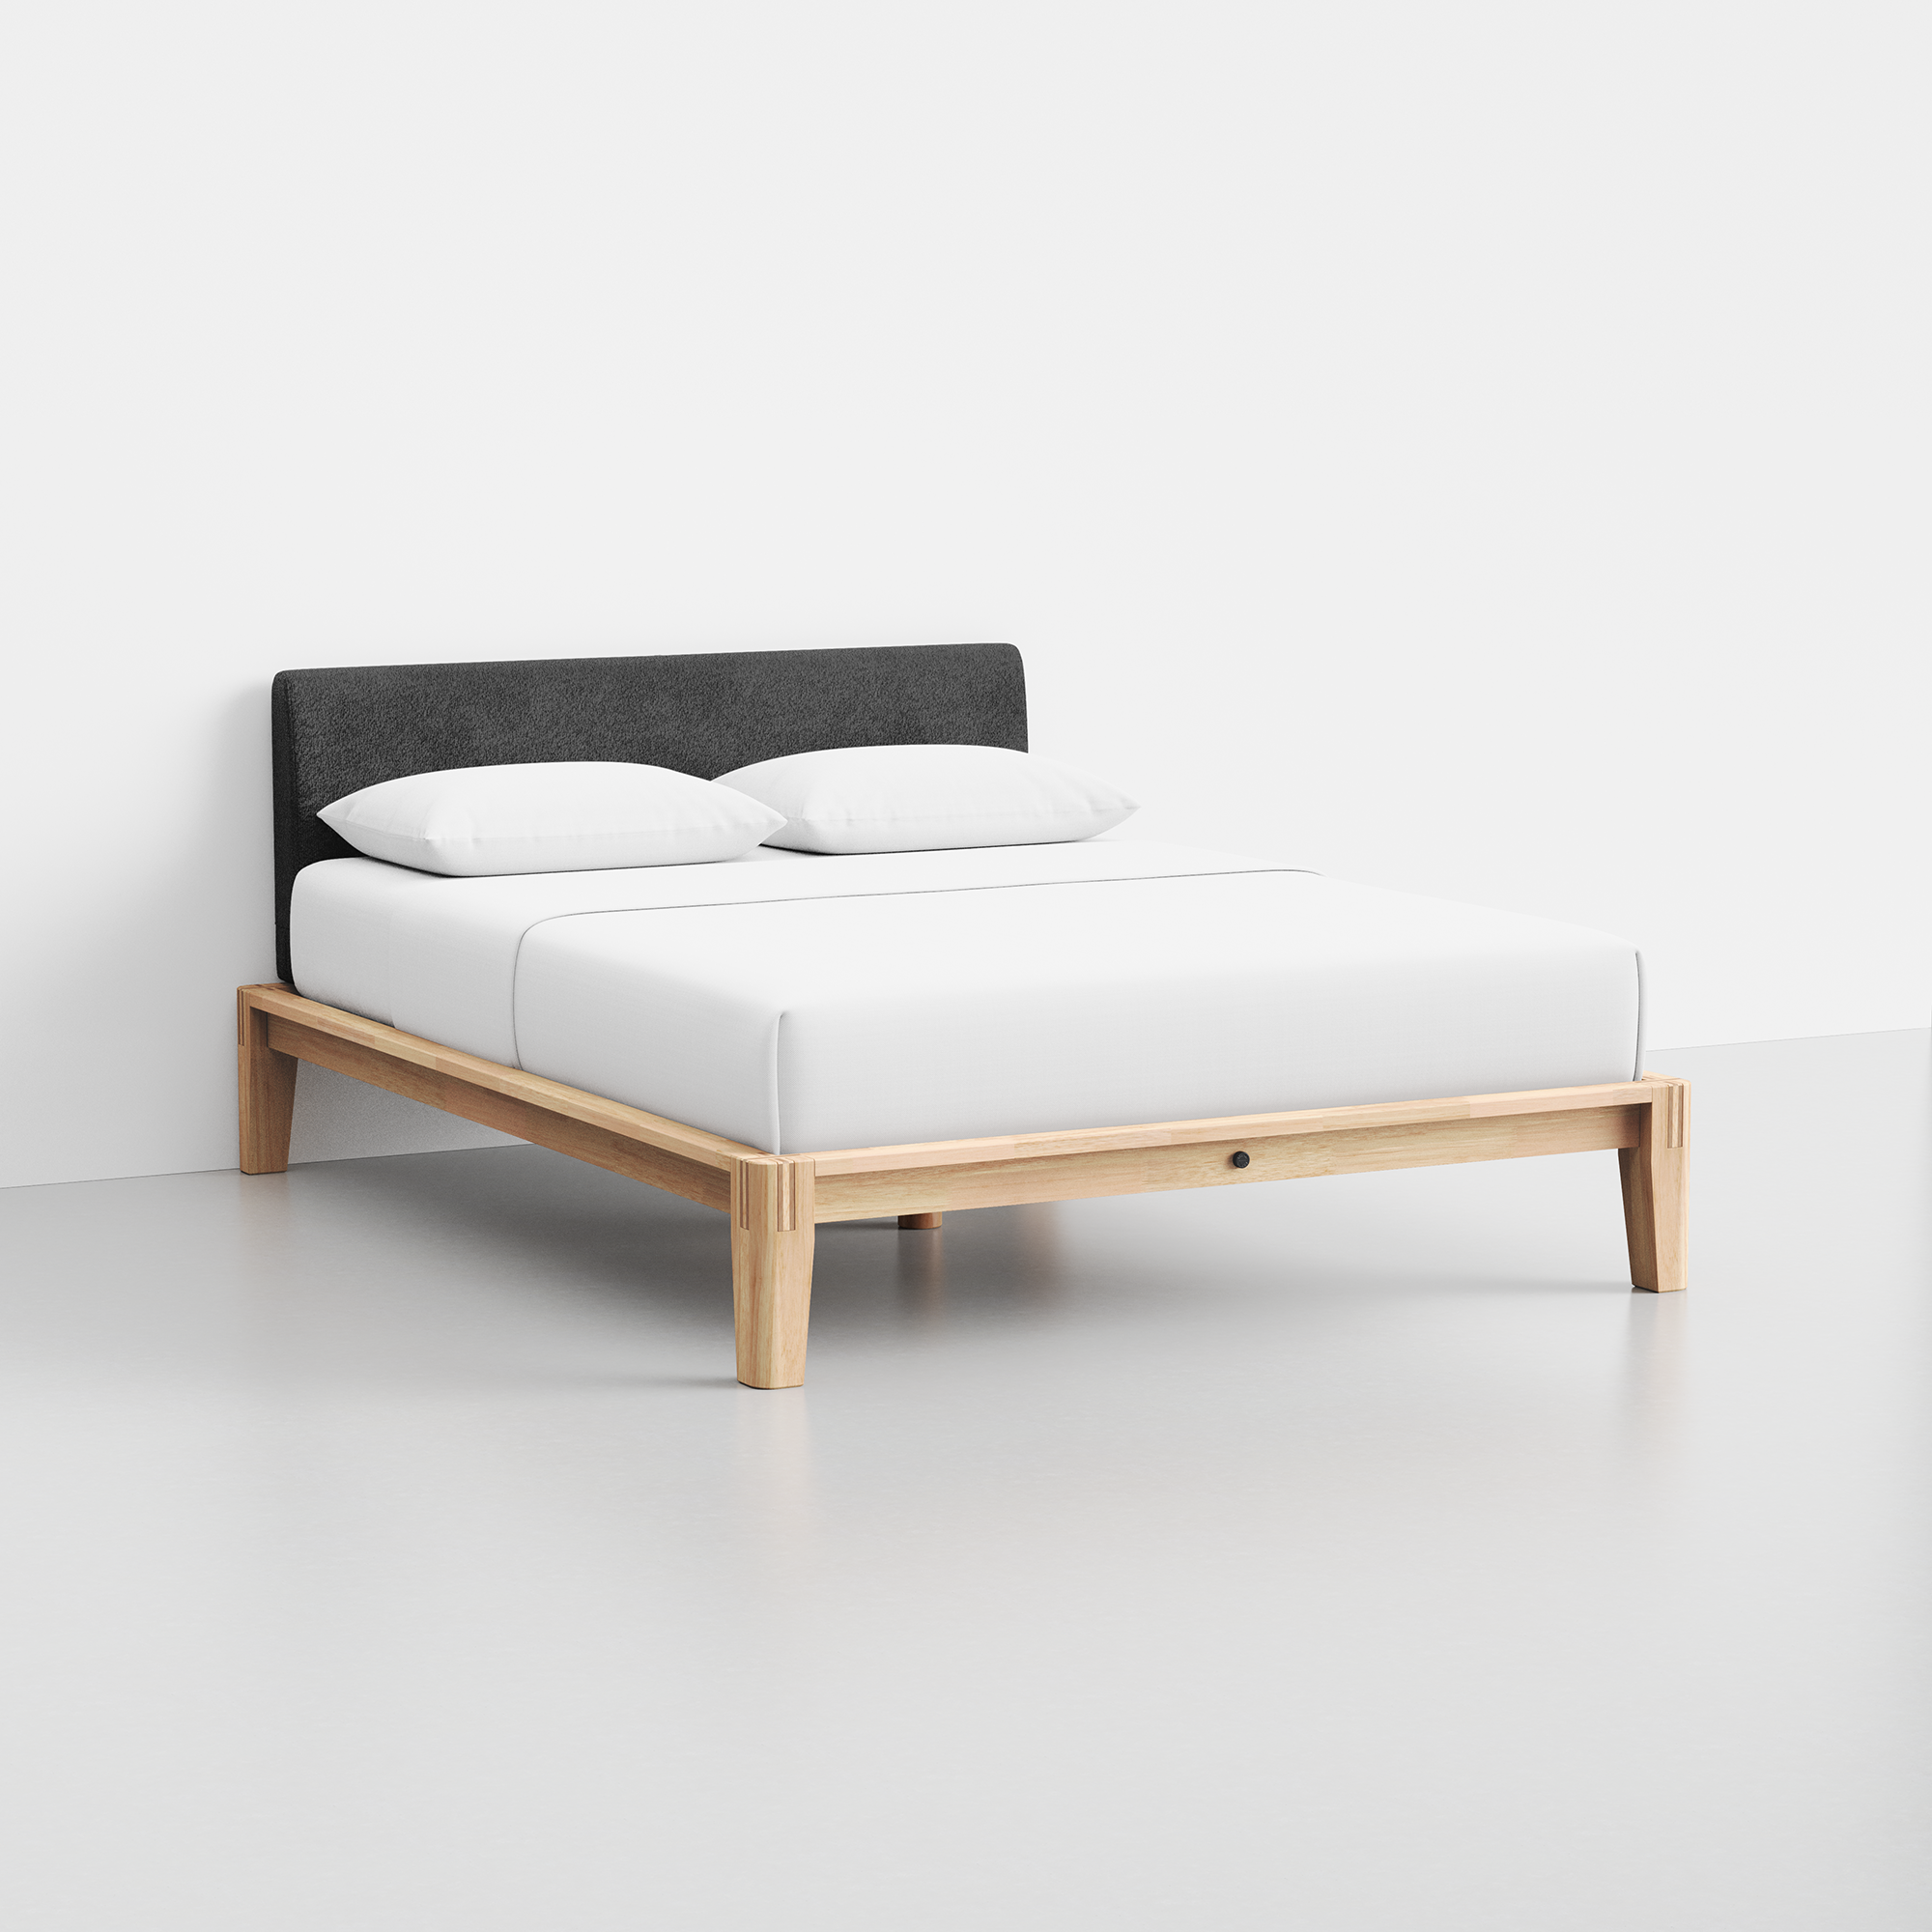 The Bed (Natural / Graphite) - Render - Angled